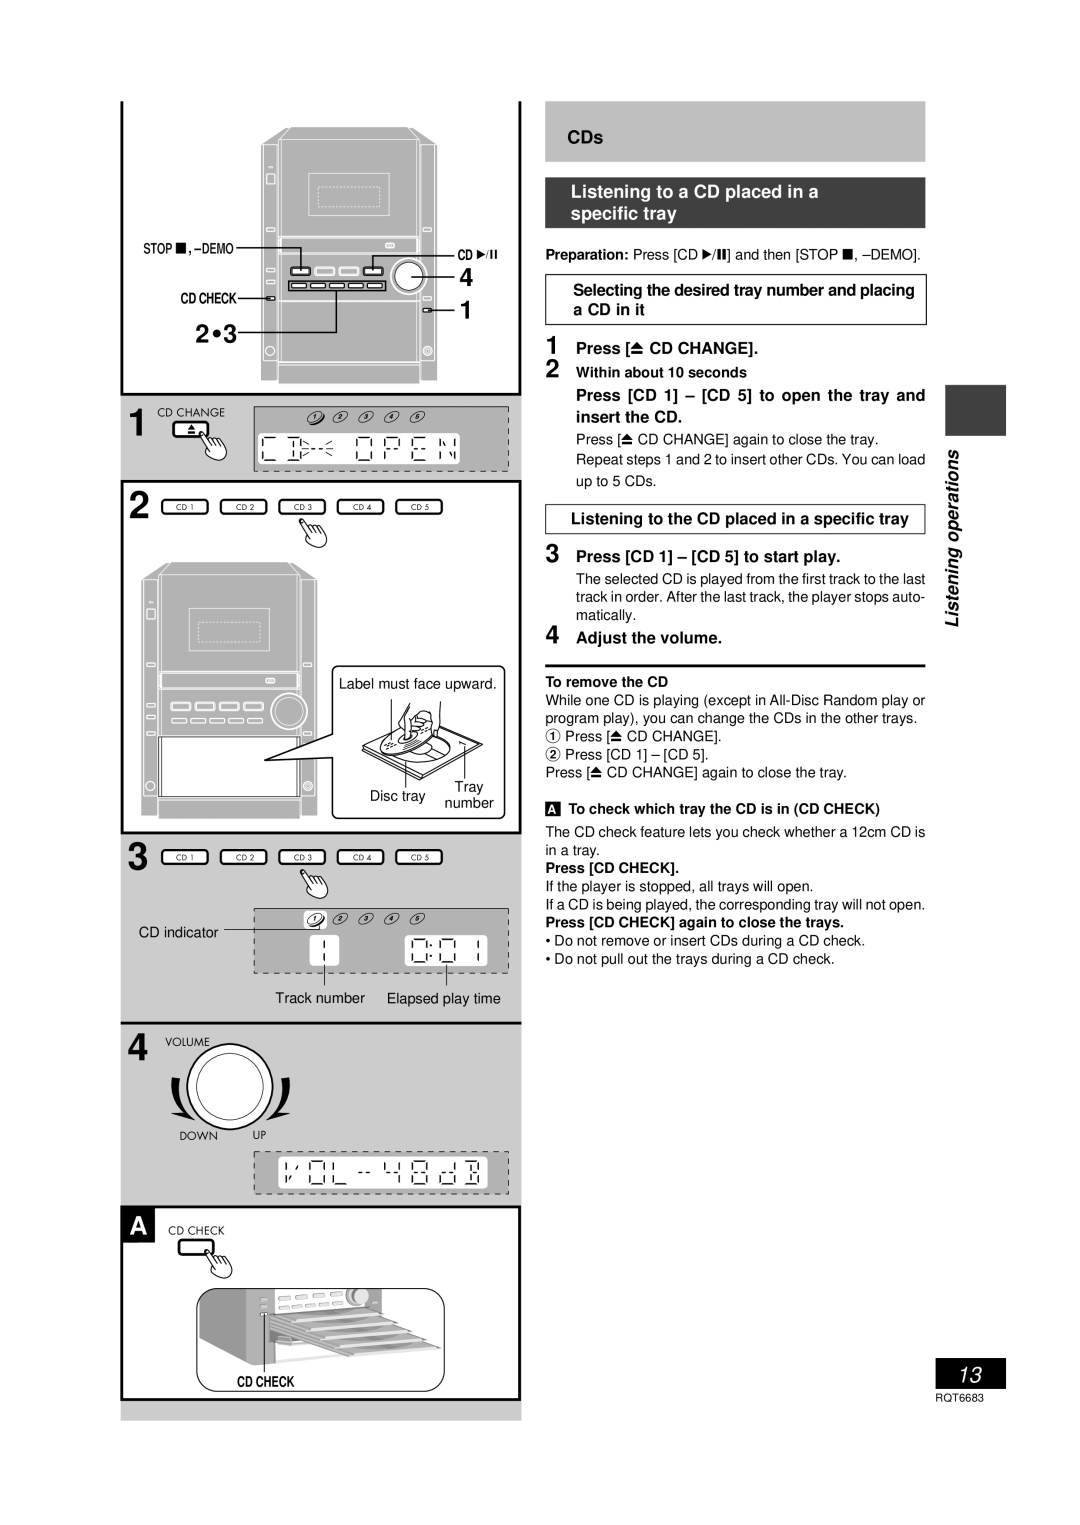 Panasonic SC-PM18 manual Listening to a CD placed in a specific tray, a CD in it, Press c CD CHANGE, insert the CD 